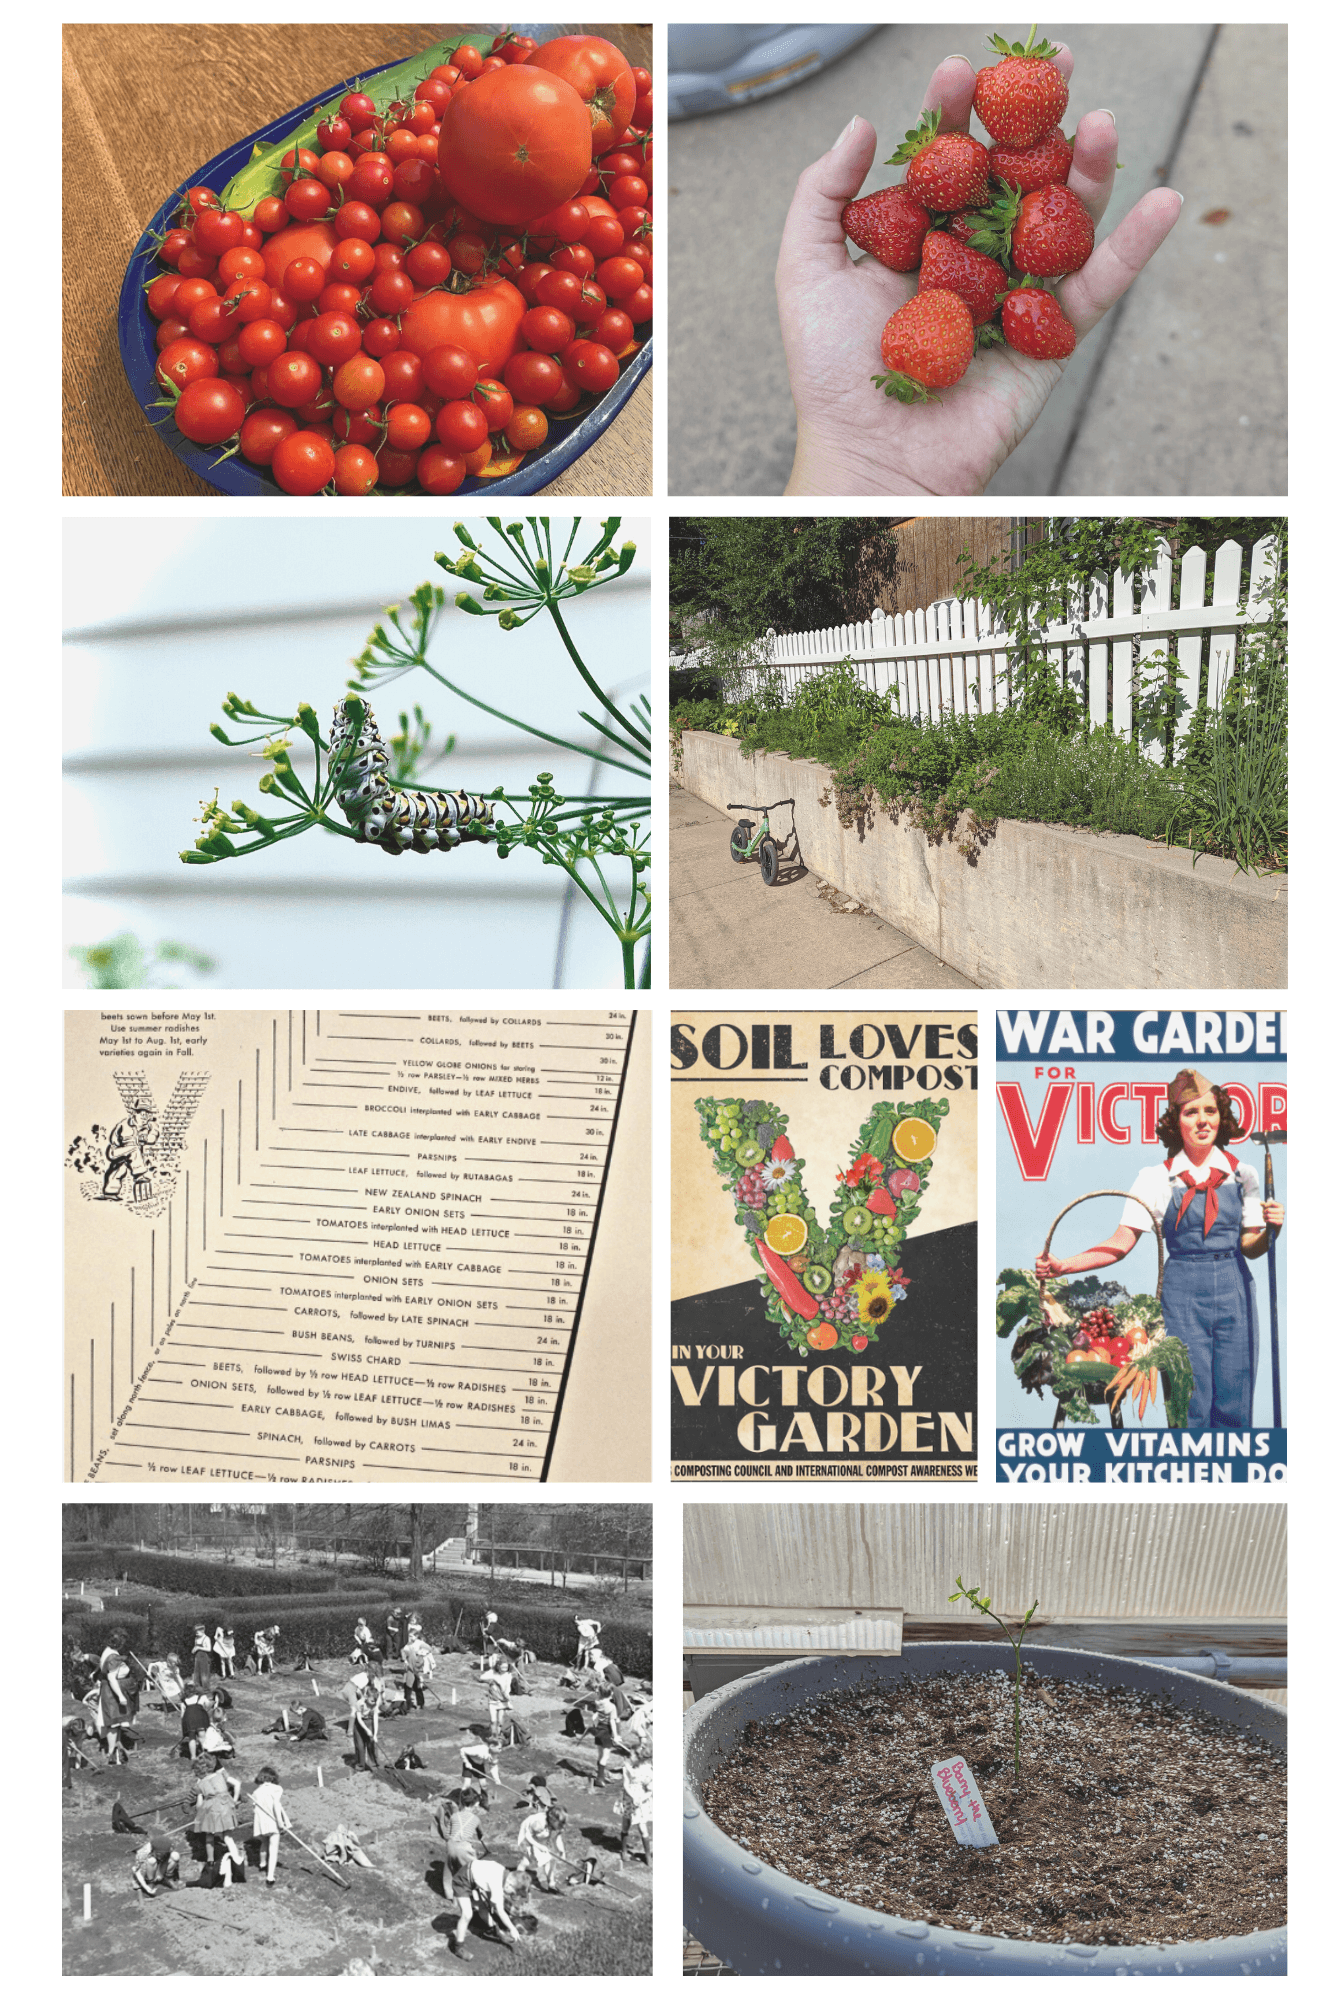 Hanna's tomato crop, Sarah's strawberry crop, Monarch caterpillar on dill, Sarah's retaining wall garden, Victory Garden for family of five, Soil Loves Compost poster, Grow Vitamins poster, Ben Franklin Elementary Victory Garden, Barry the Blueberry Bush